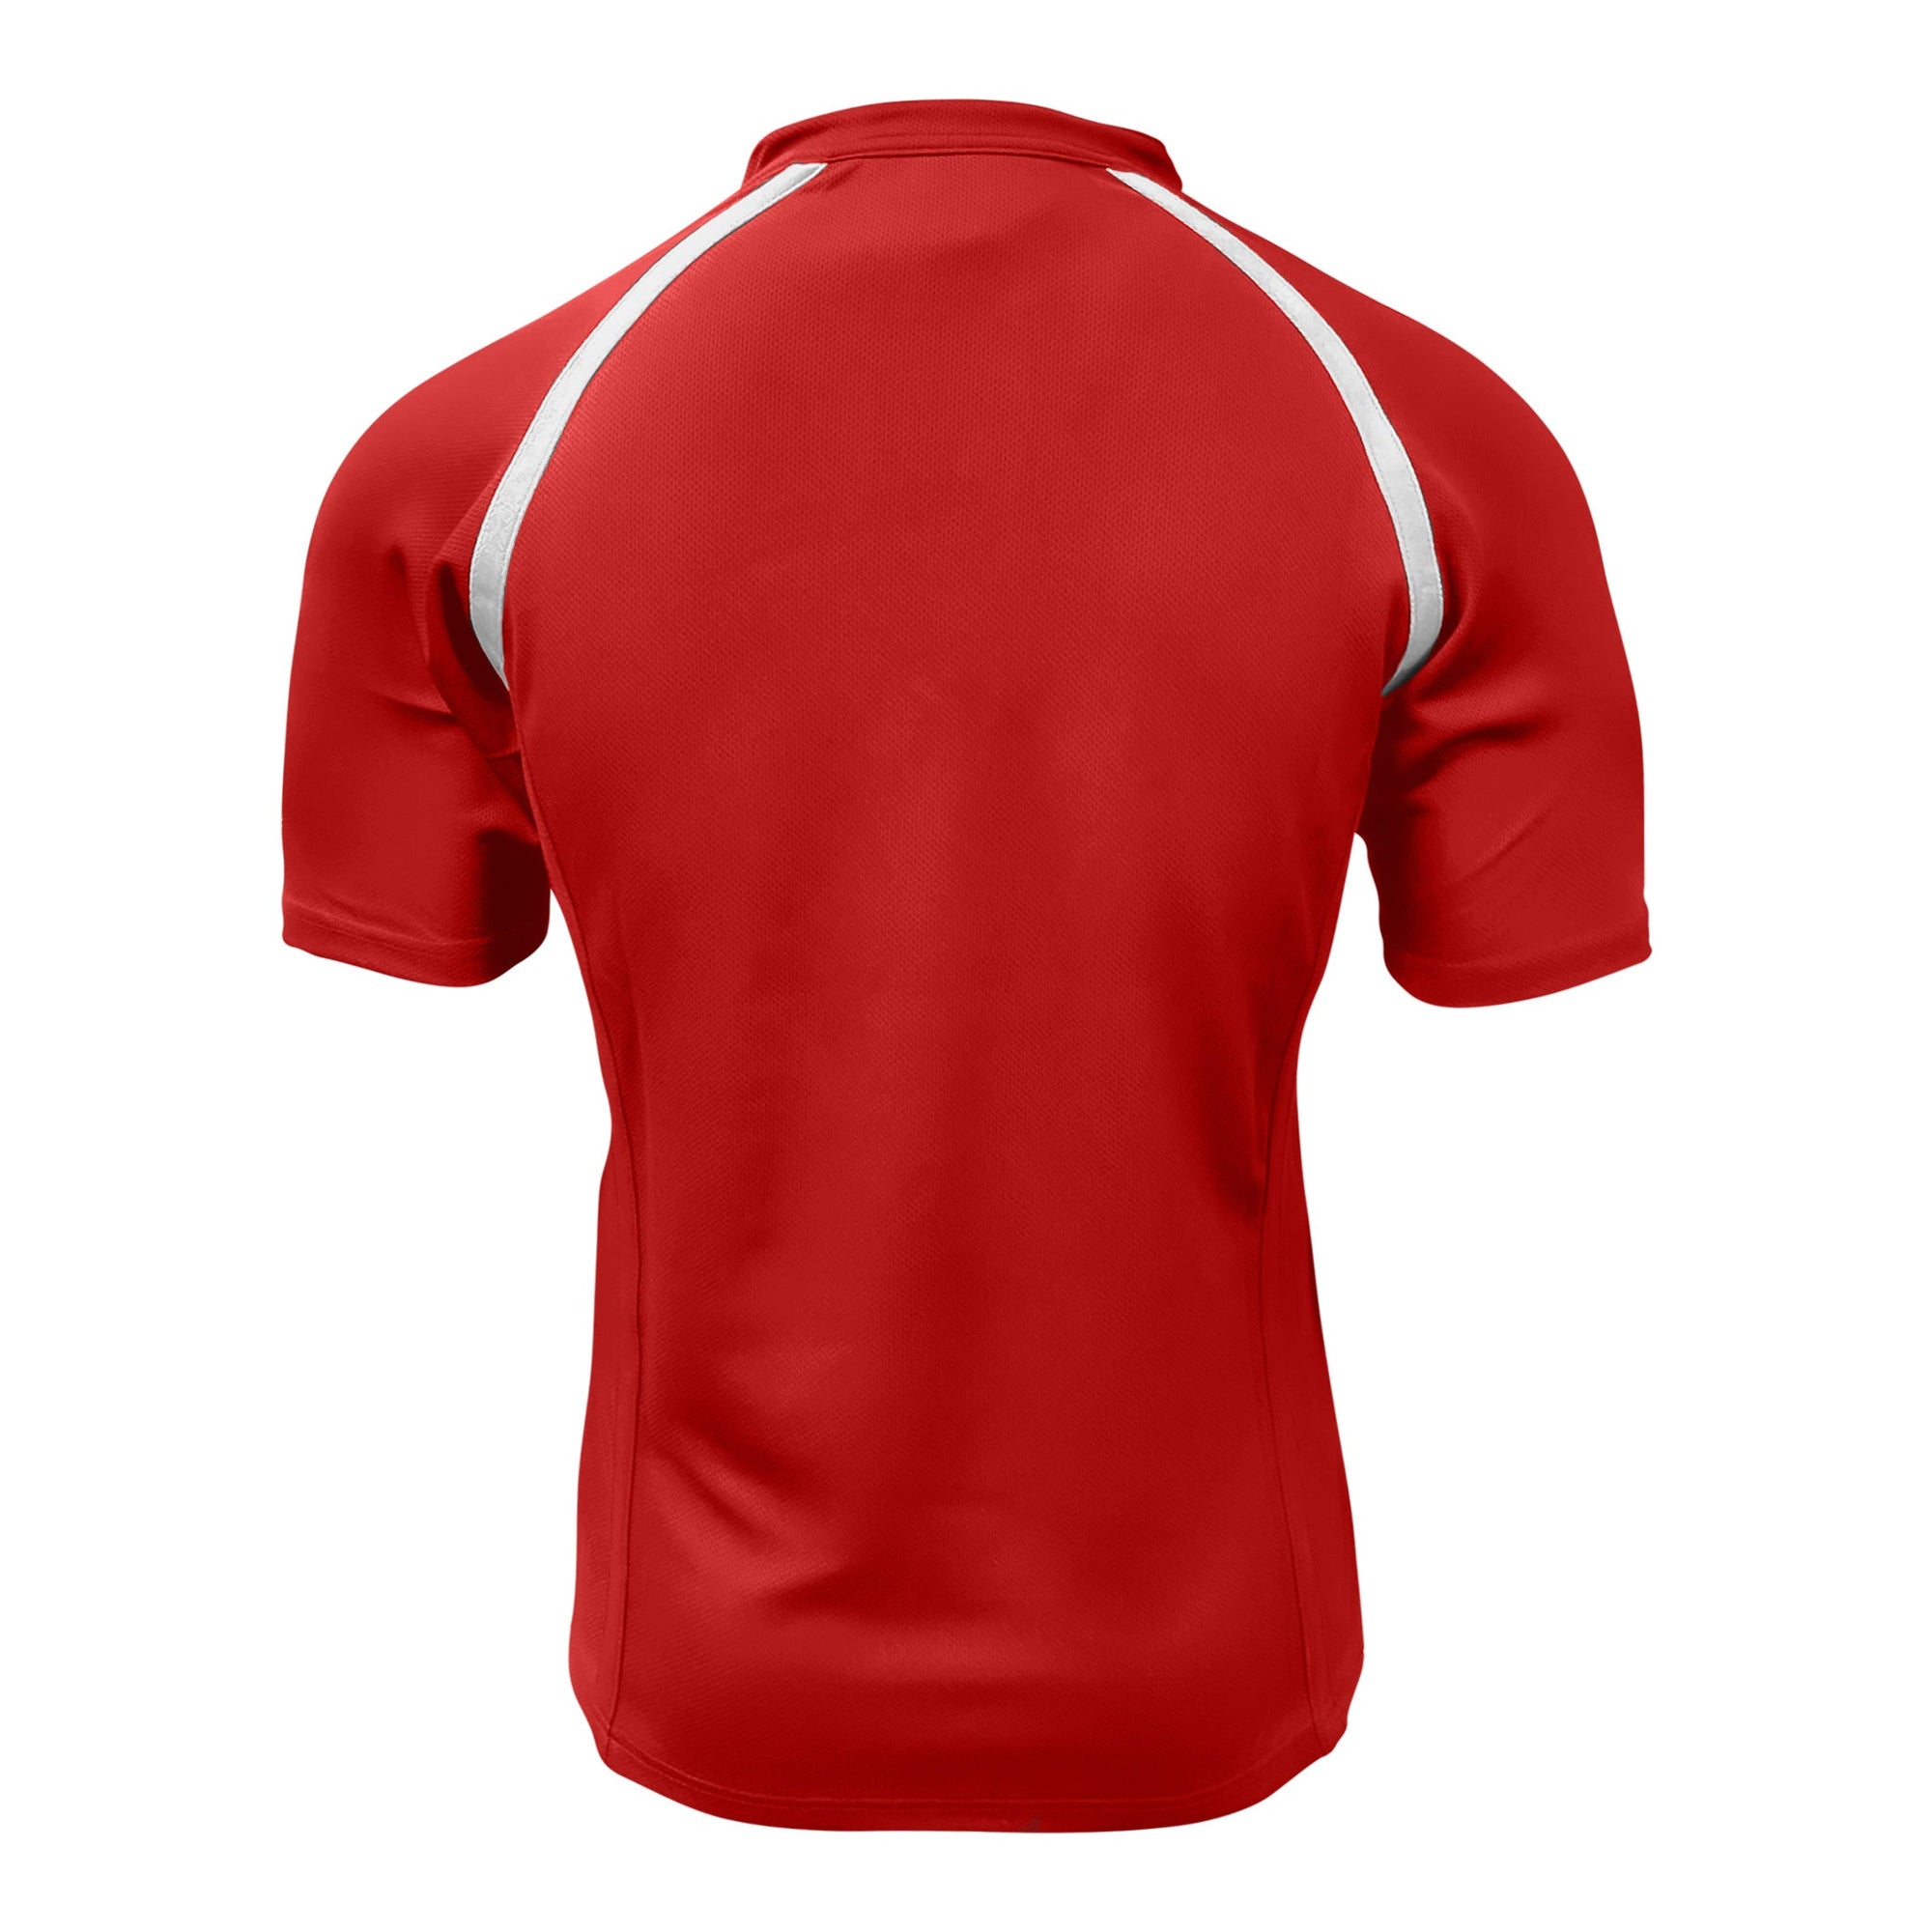 Rugby Imports Portland Pigs XACT II Jersey